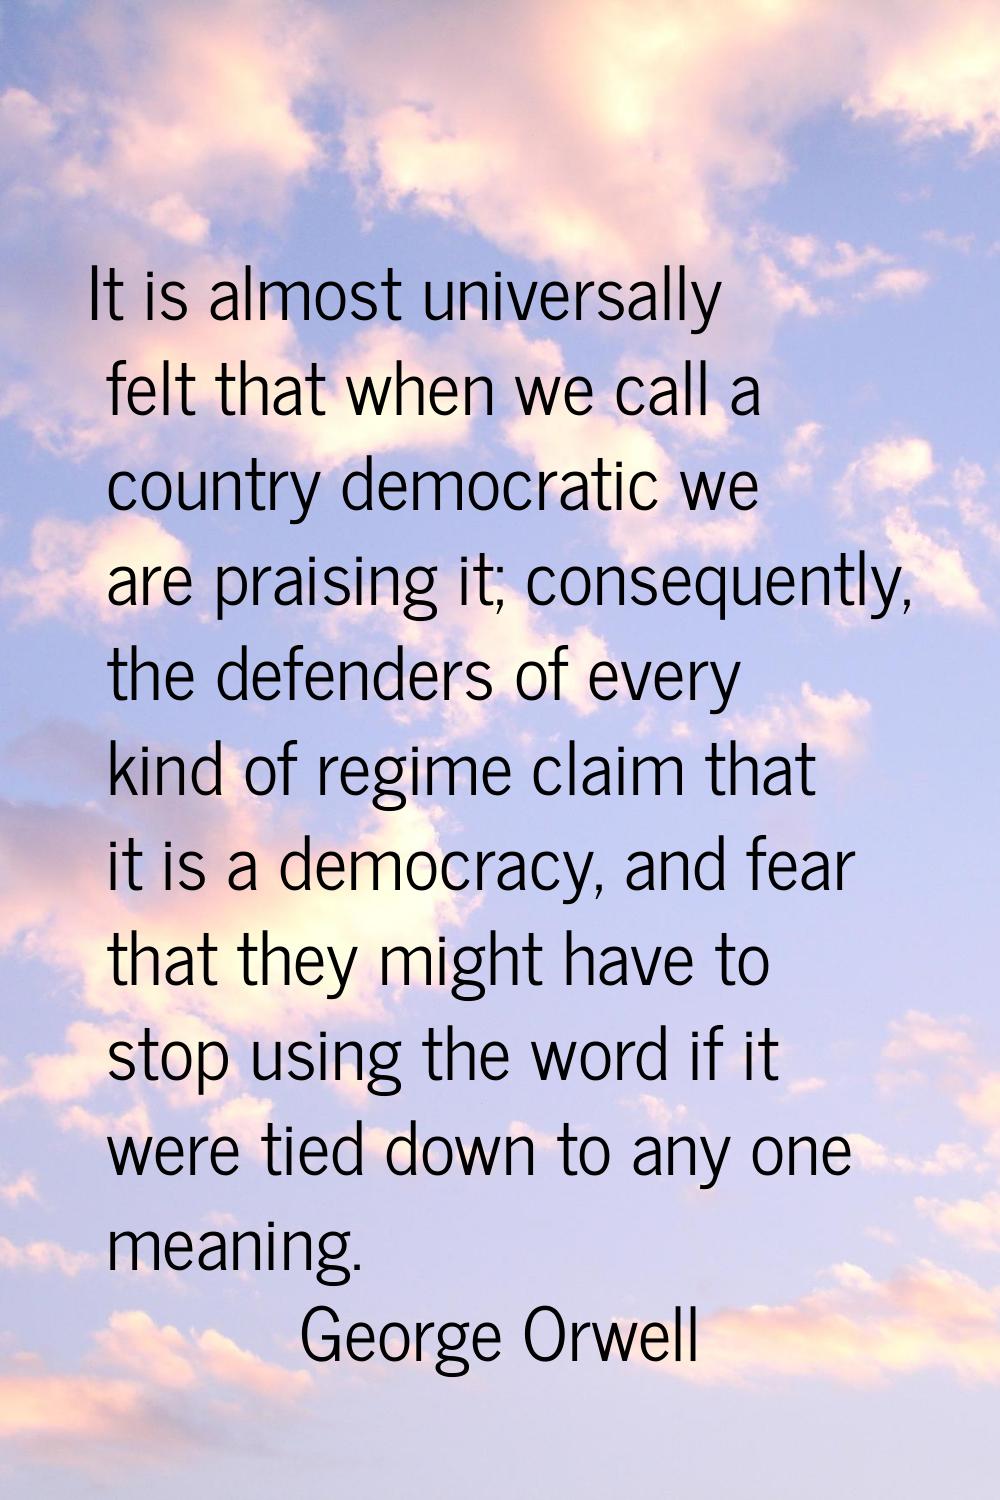 It is almost universally felt that when we call a country democratic we are praising it; consequent